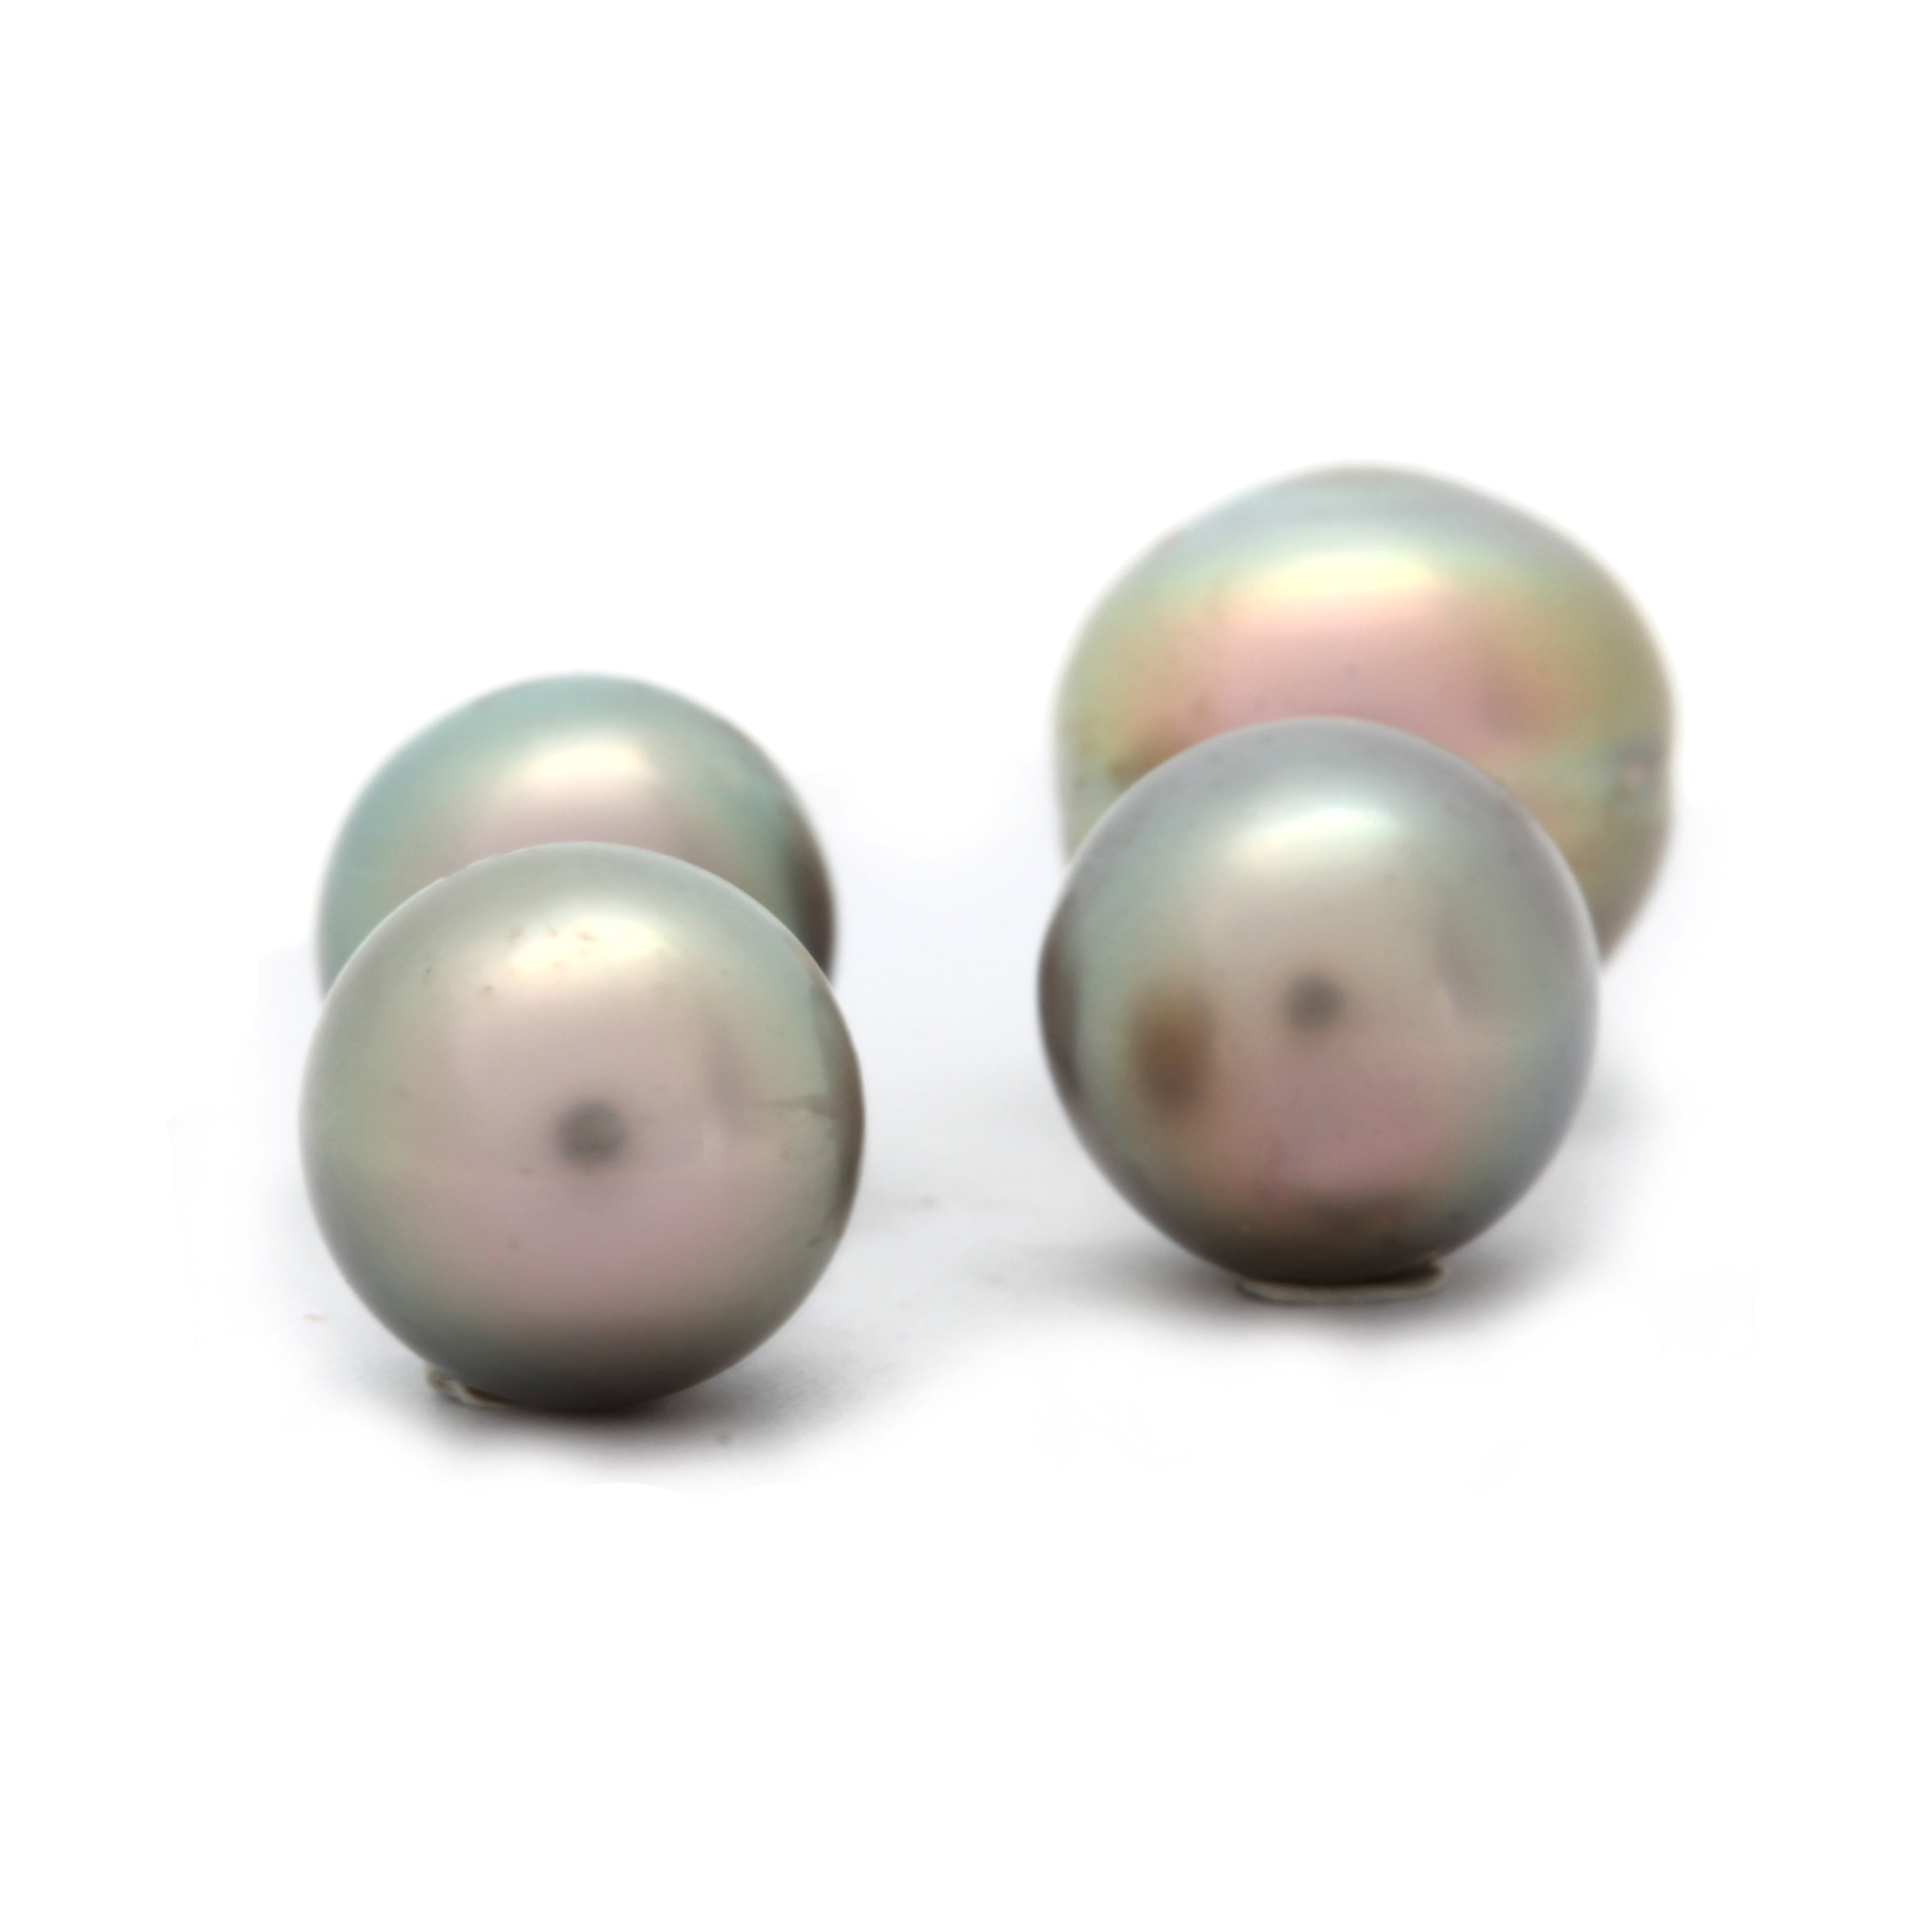 Lot of 4 Baroque Cortez Pearls from 2020 HARVEST